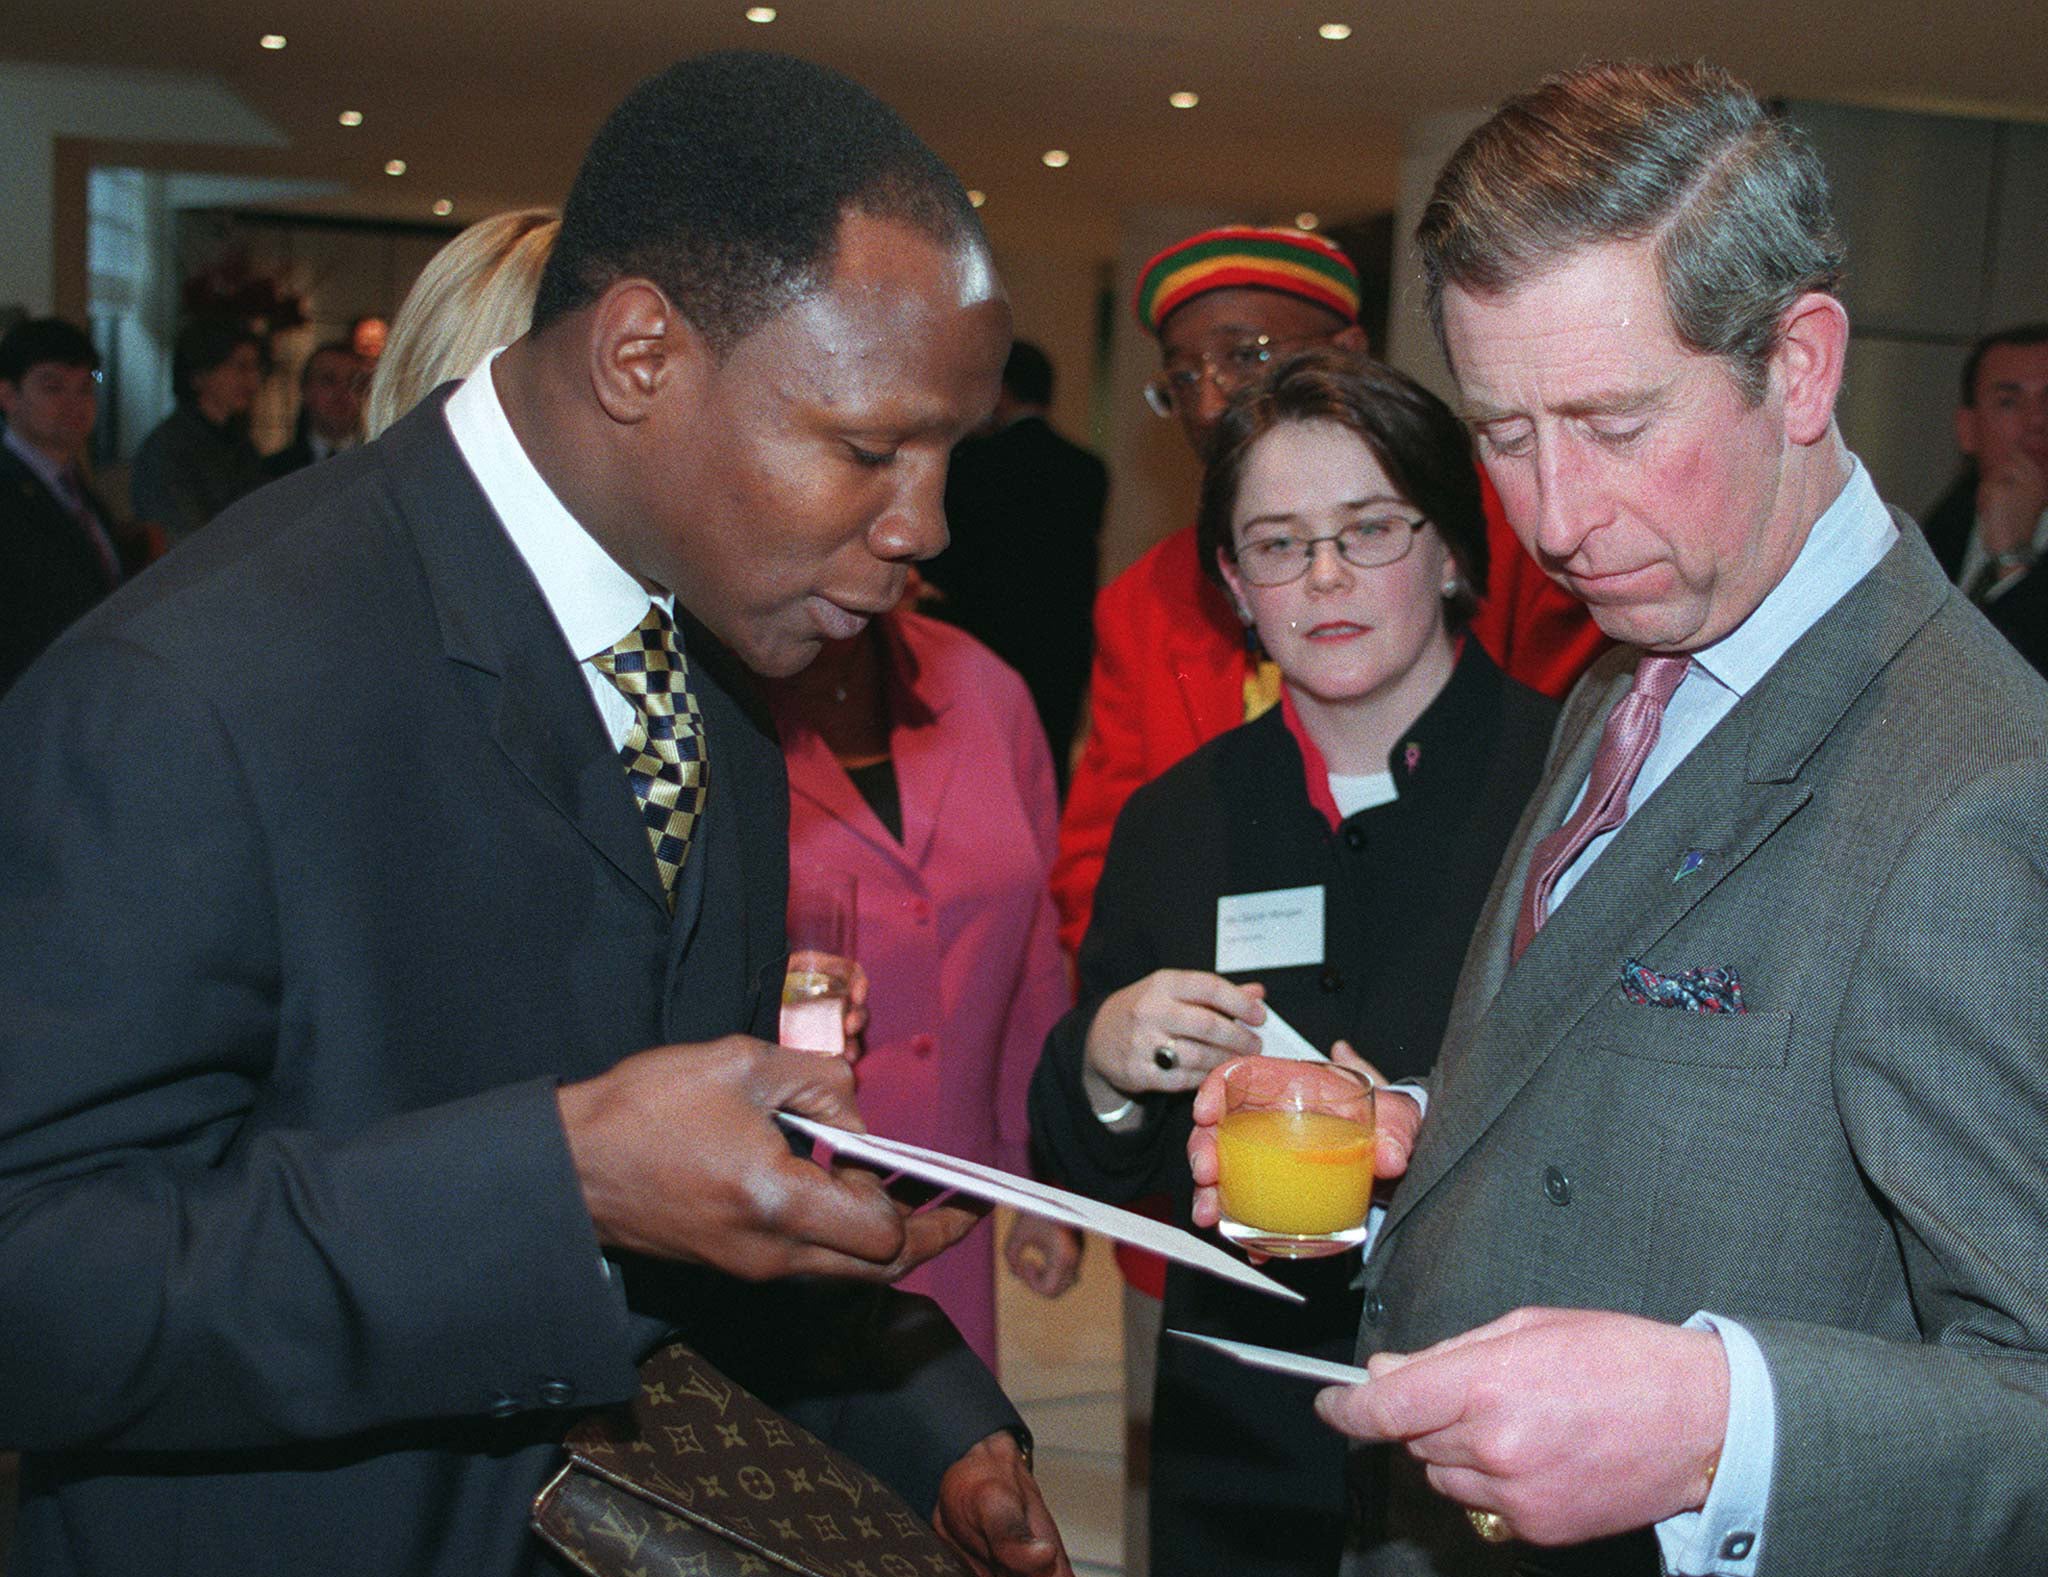 Charles enjoying an orange juice as he met boxer Chris Eubank at a Breakthrough for Breast Cancer reception in 1998